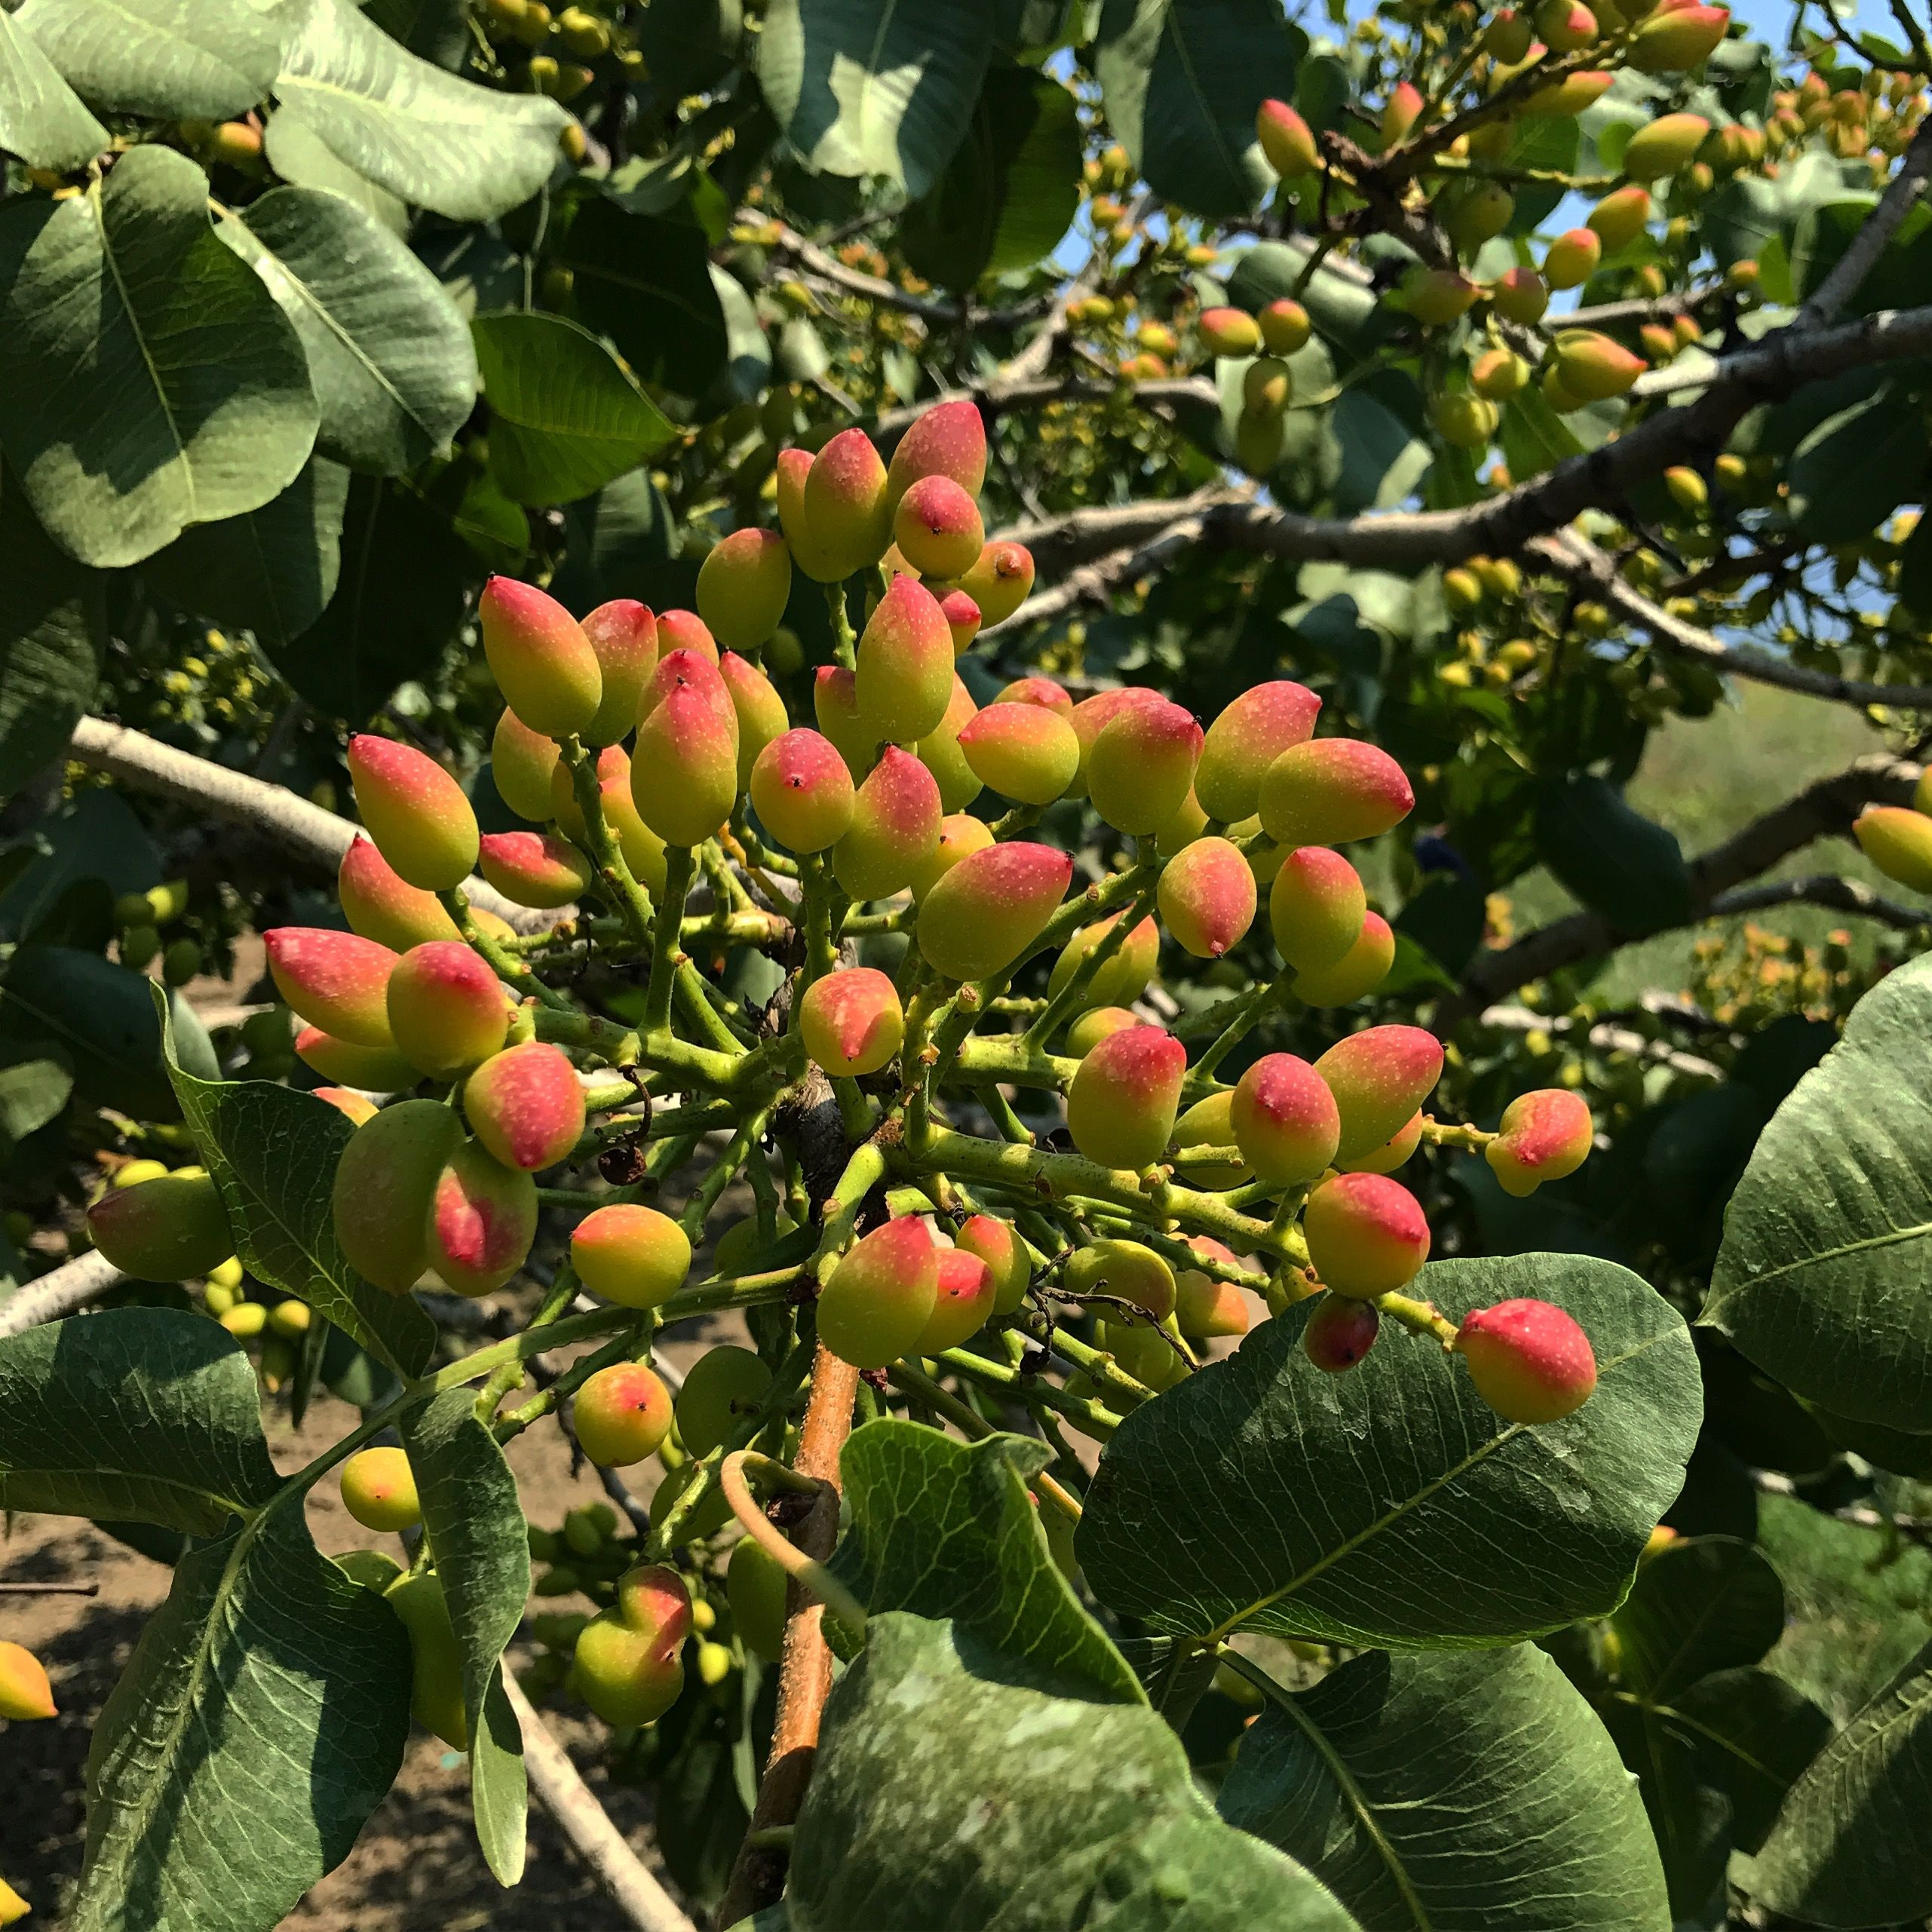 Bunch of pistachios nearly ready for harvest | Pistachio Orchards ...